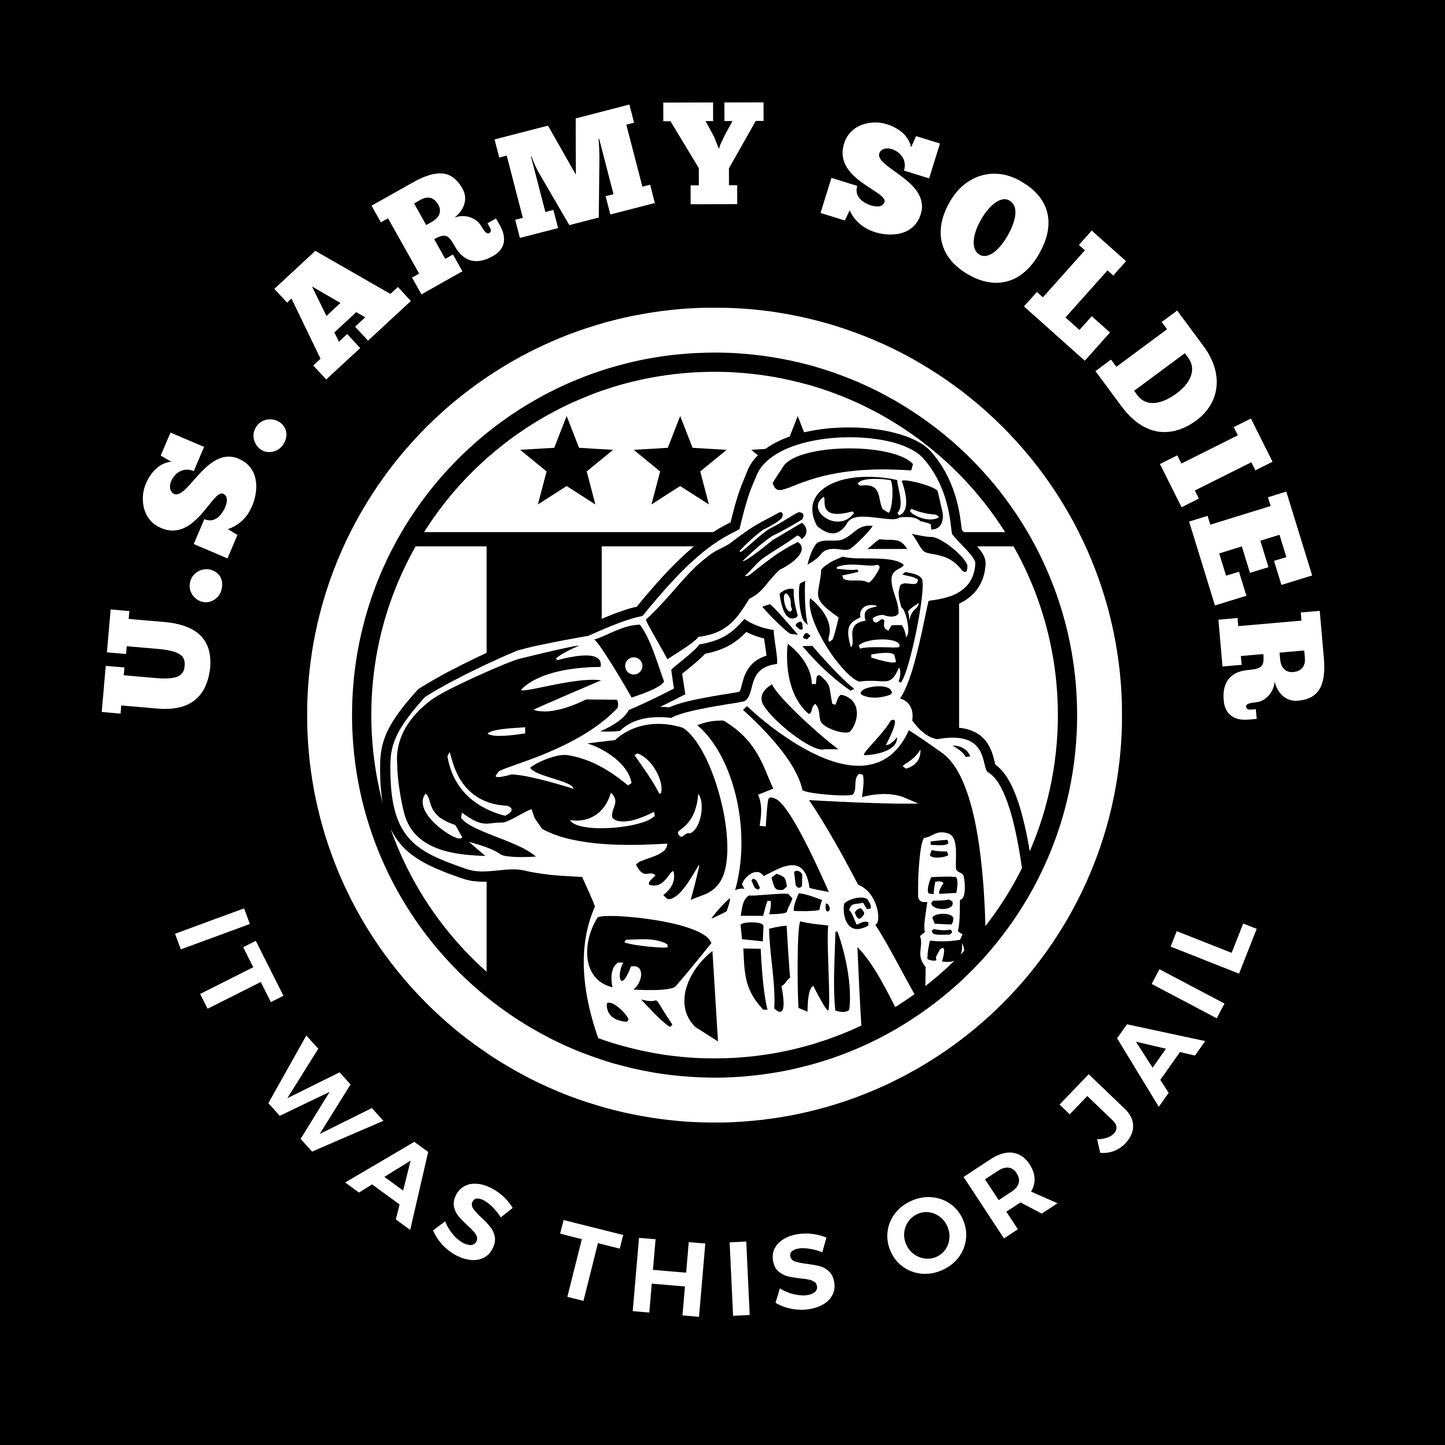 Funny US Army Soldier T-shirt, Army Soldier Funny T-shirt